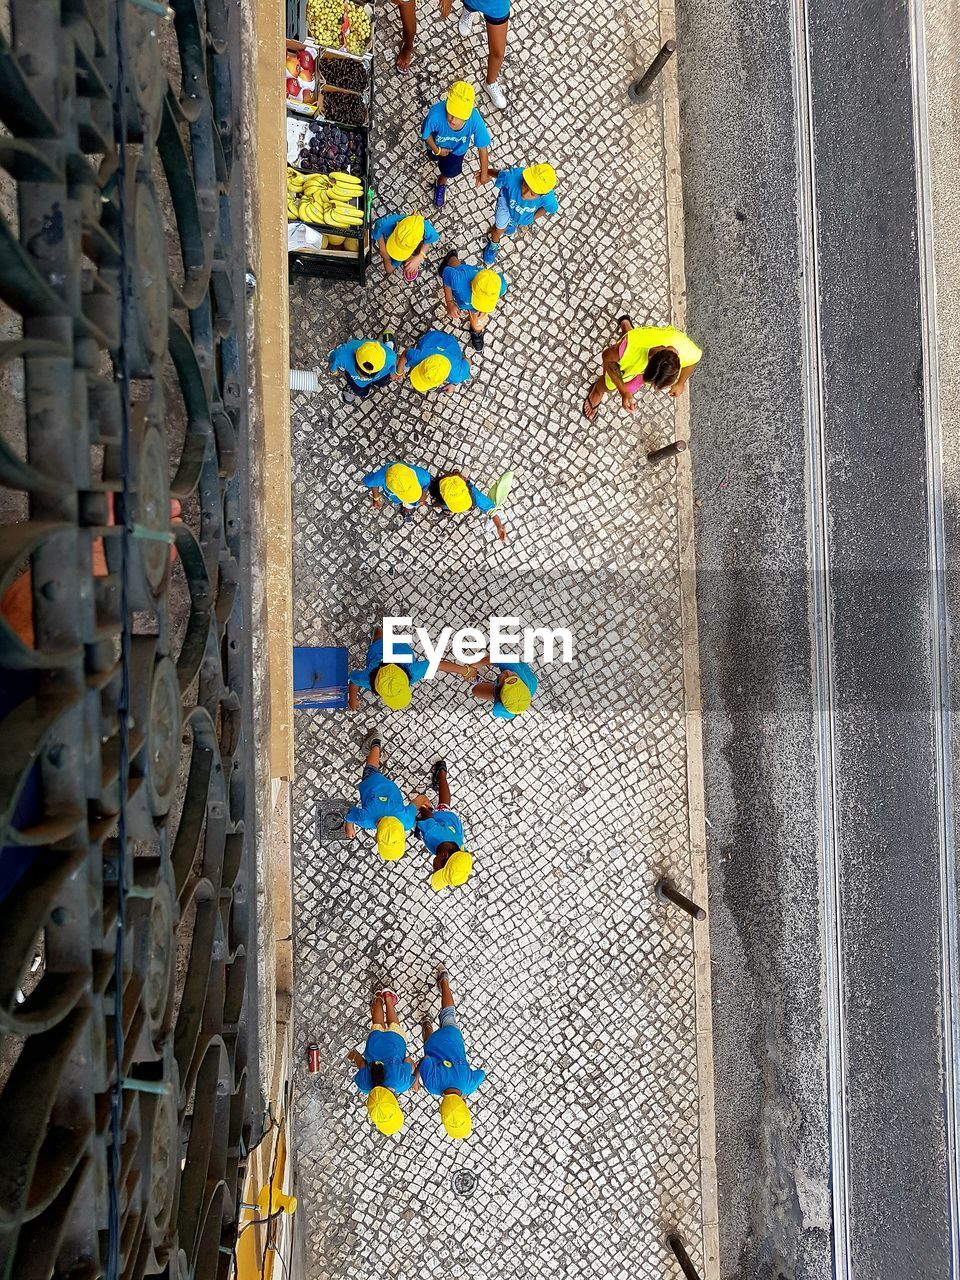 Directly above shot of people on sidewalk